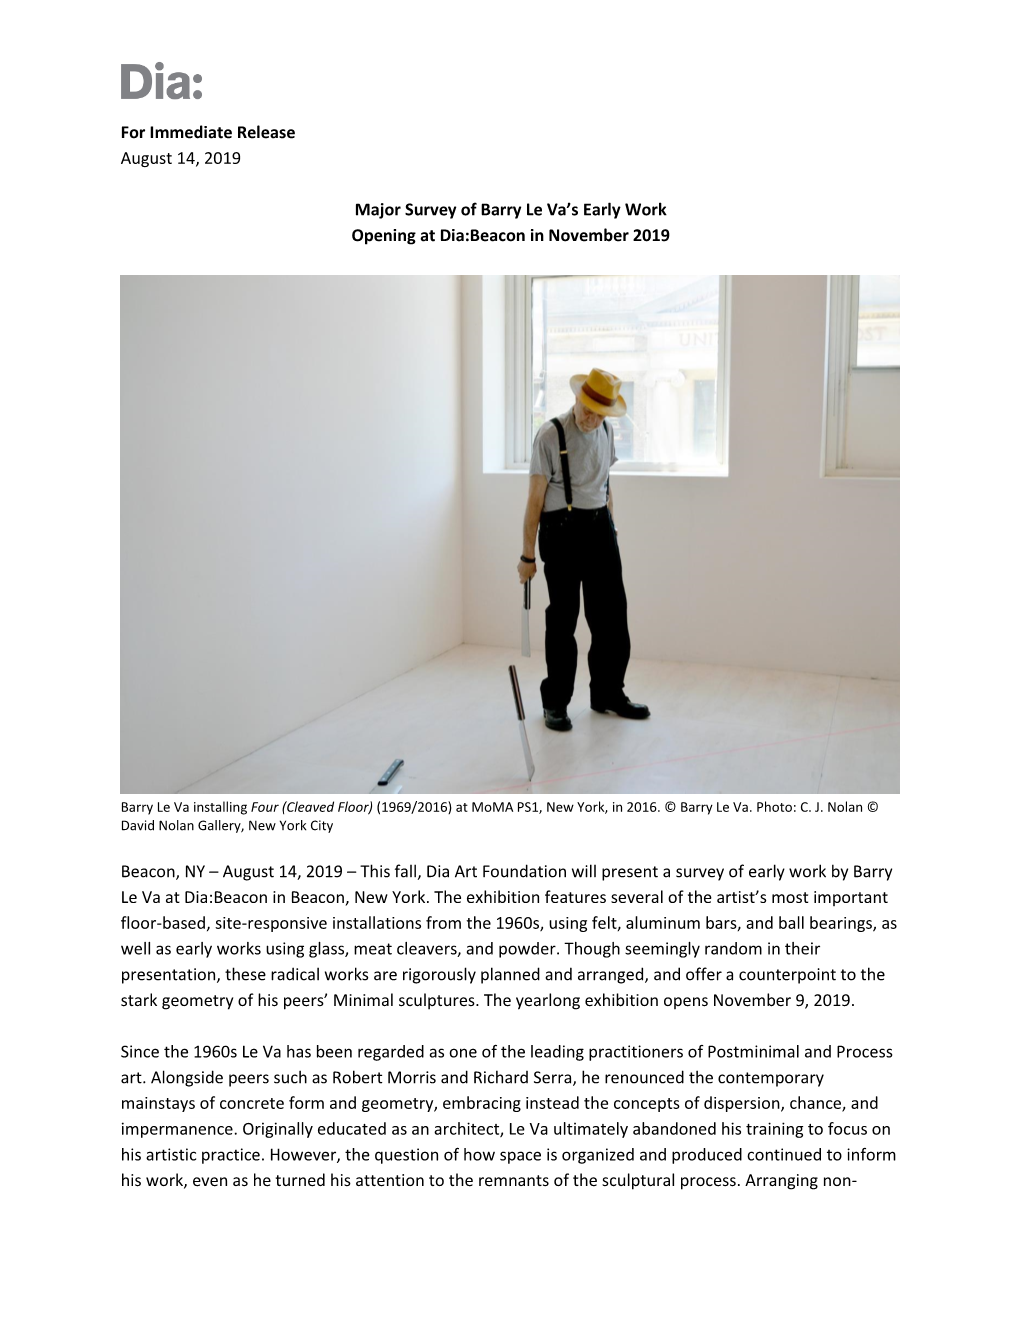 For Immediate Release August 14, 2019 Major Survey of Barry Le Va's Early Work Opening at Dia:Beacon in November 2019 Beacon